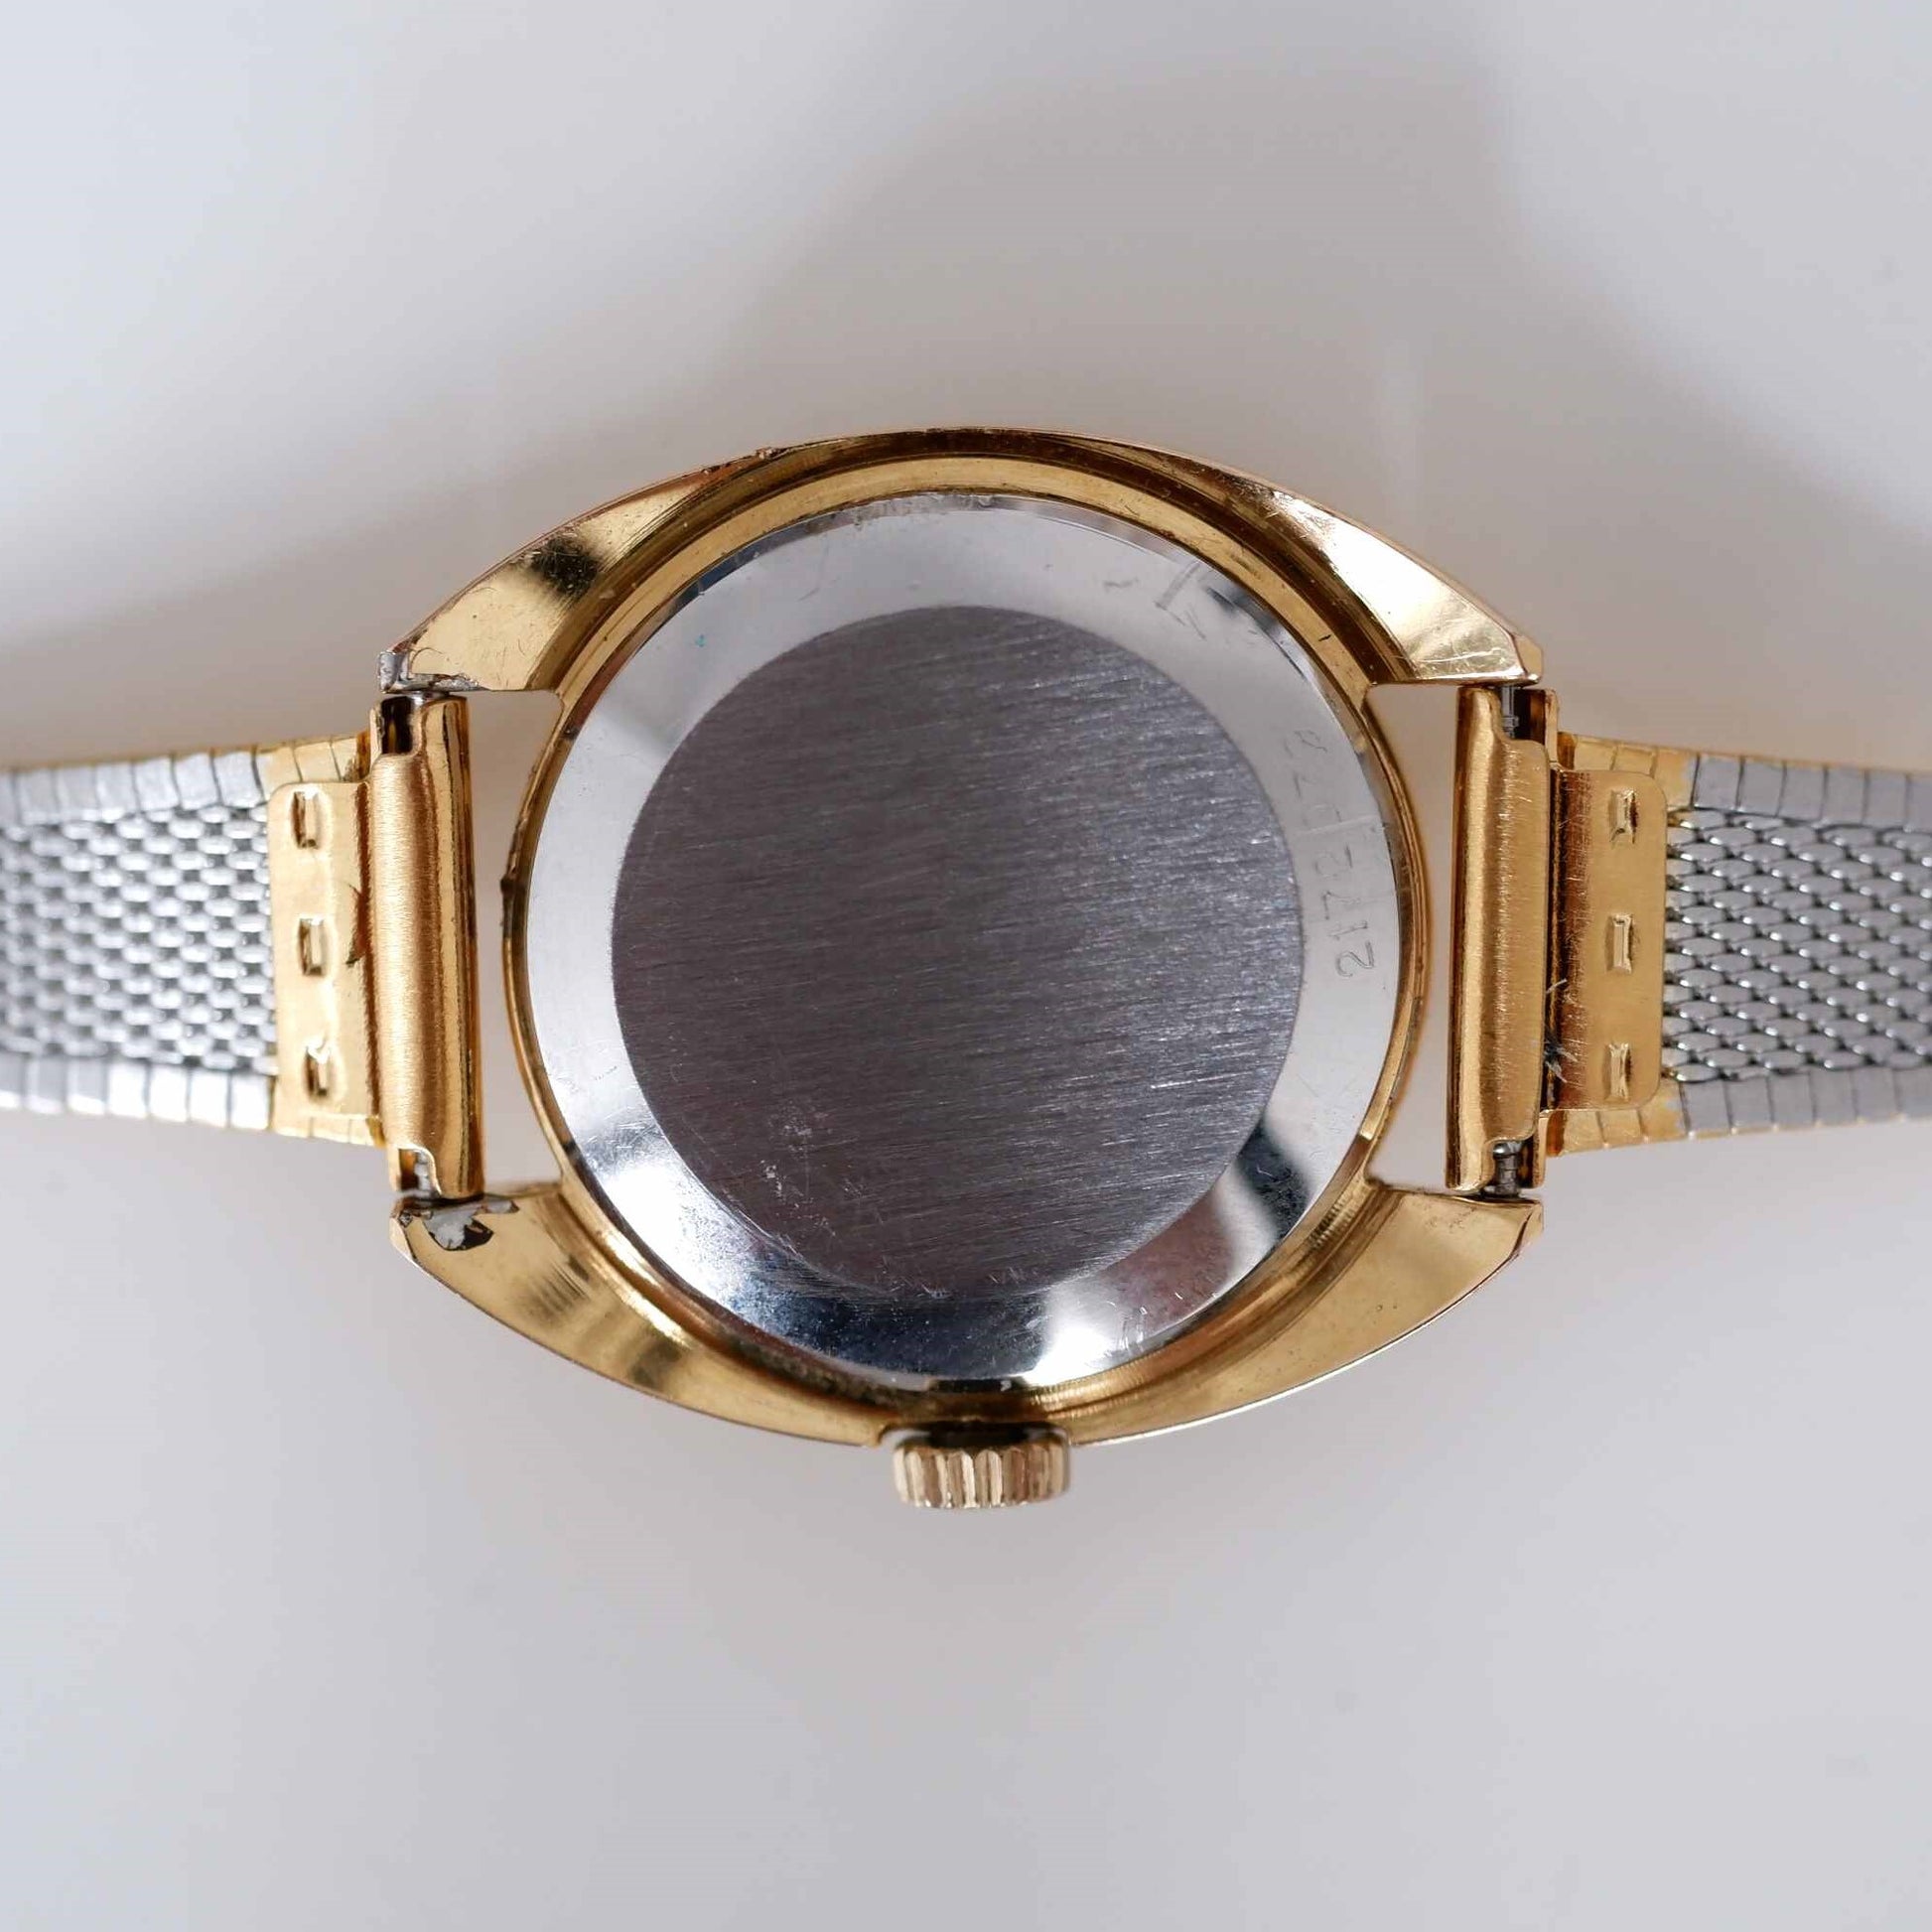 IWC Vintage Ladies Watch: 60s Golden Iconic, Gold Dial Mechanical | Back Side